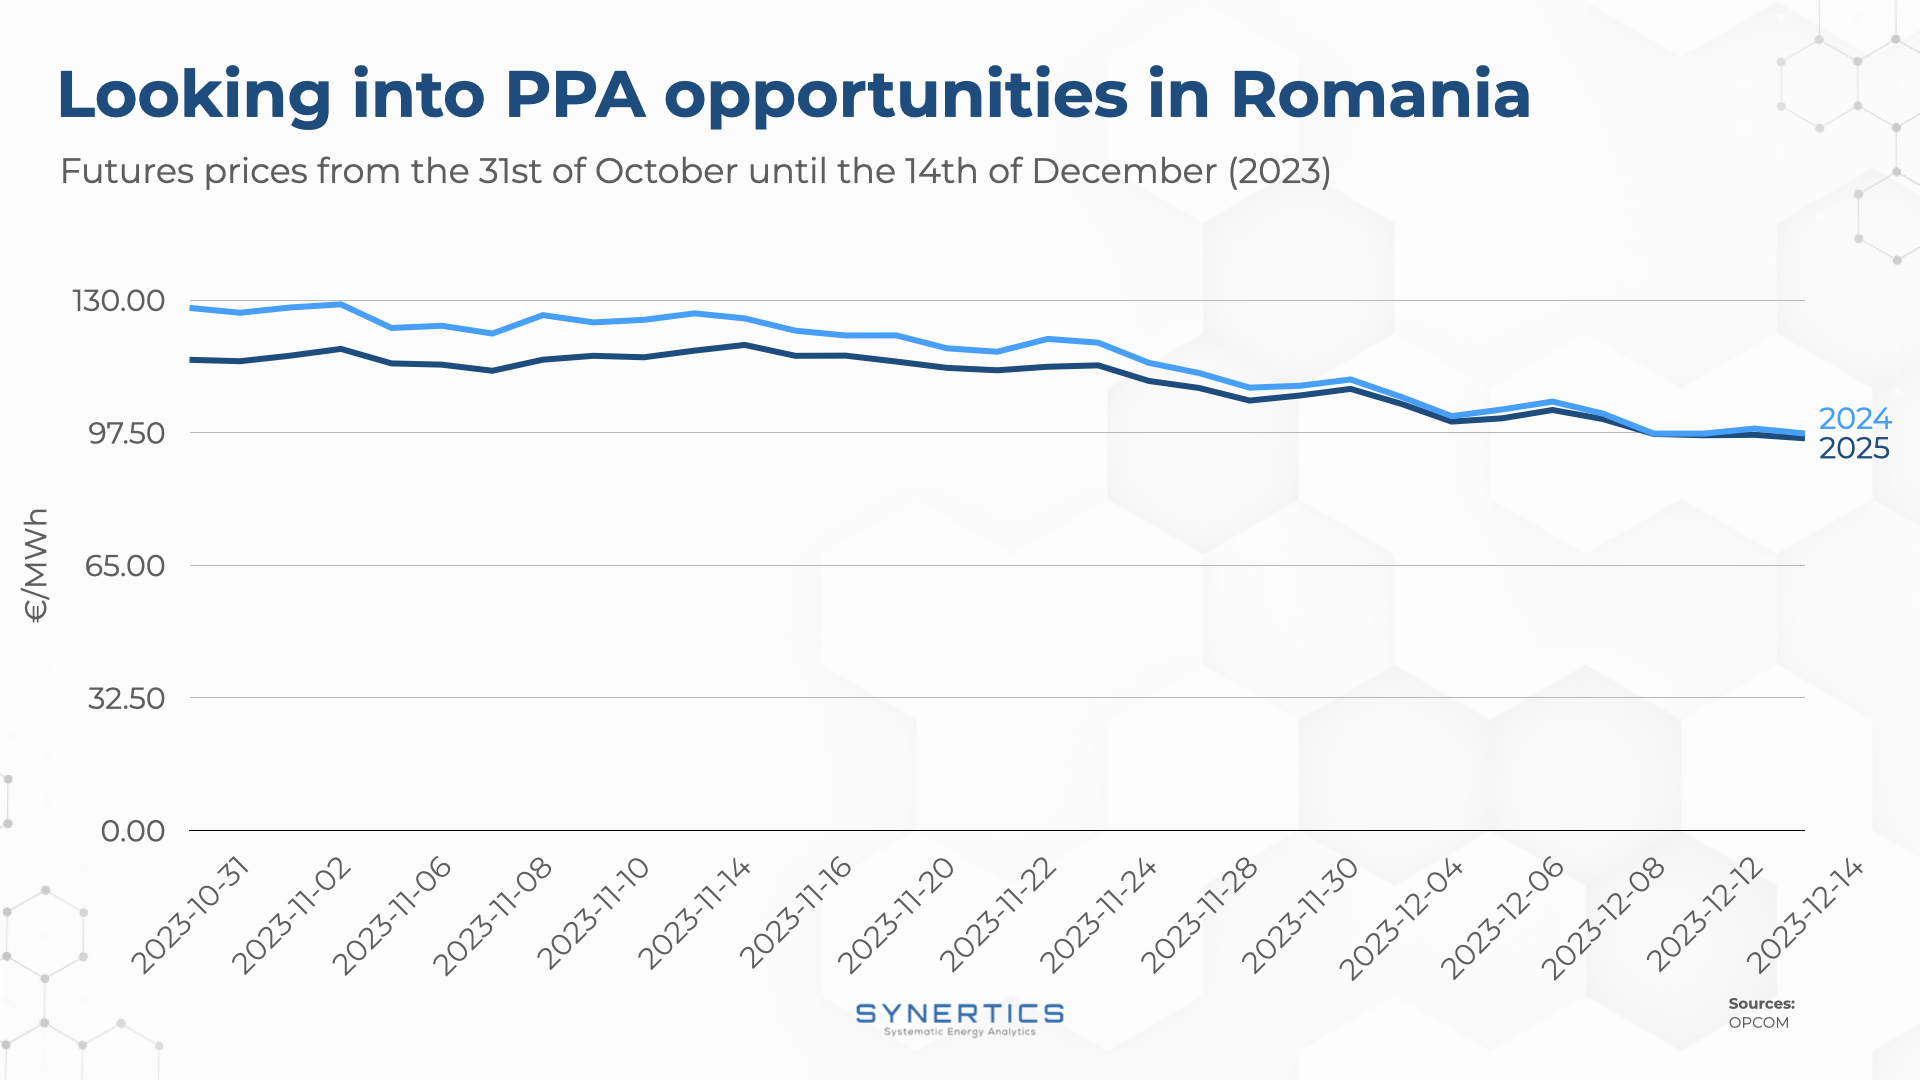 PPA opportunities in Romania - Futures prices